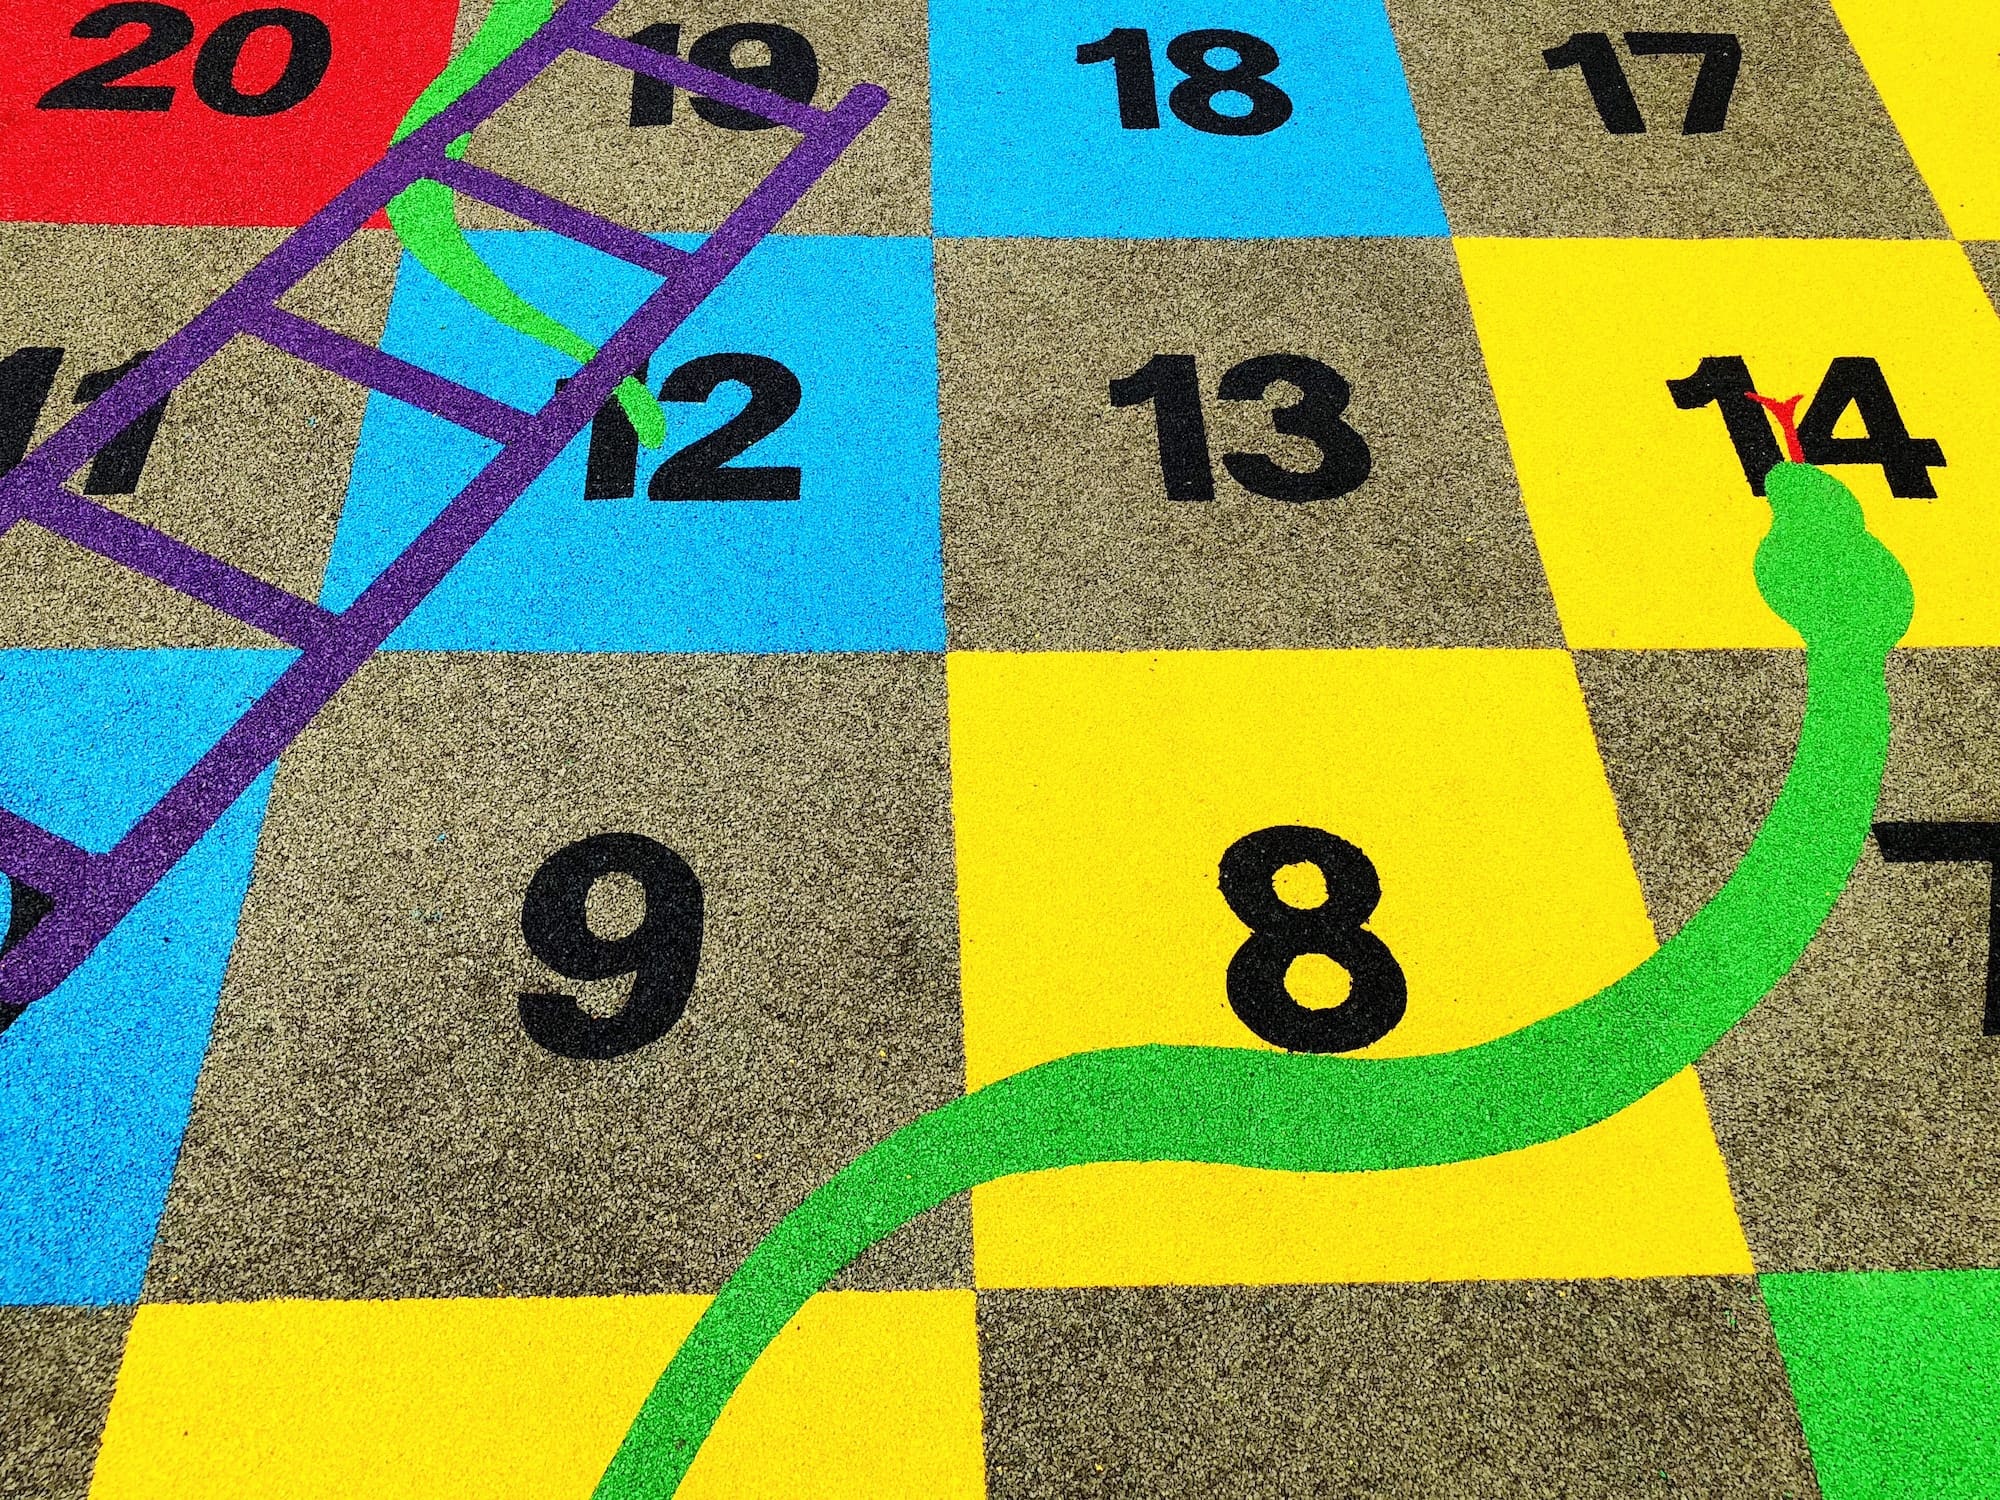 Playground markings of a snakes and ladders game